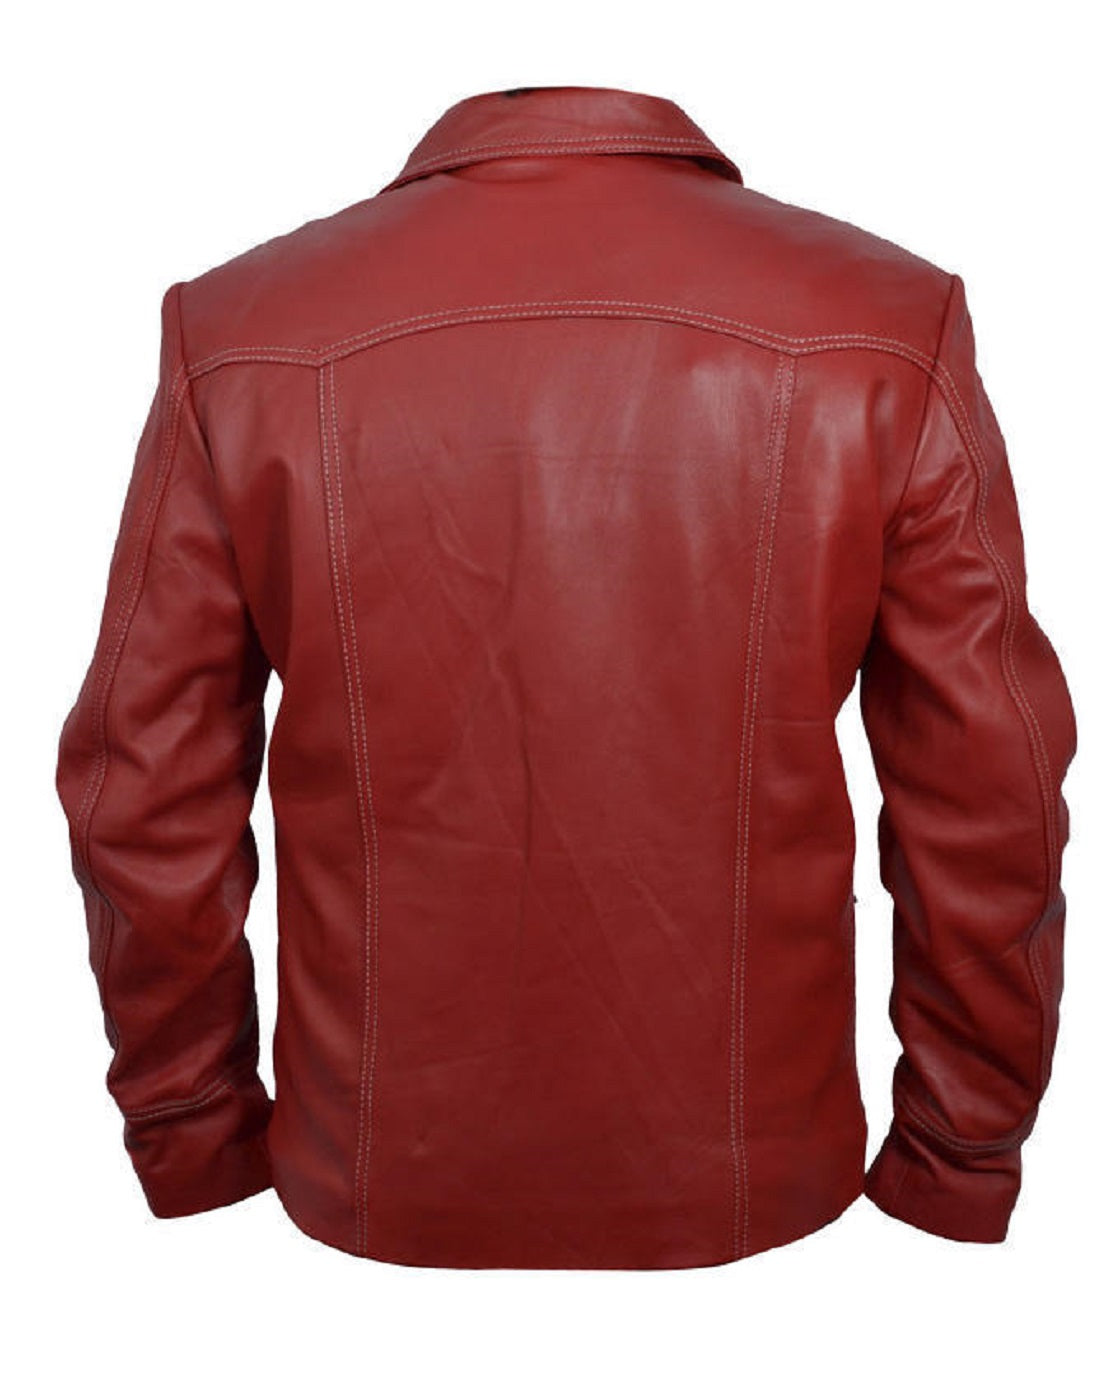 Mens Red Biker Leather Jacket Plus Size 3XL Faux Leather Coat With Zipper  And Rivets For Autumn Style From Herish, $35.19 | DHgate.Com